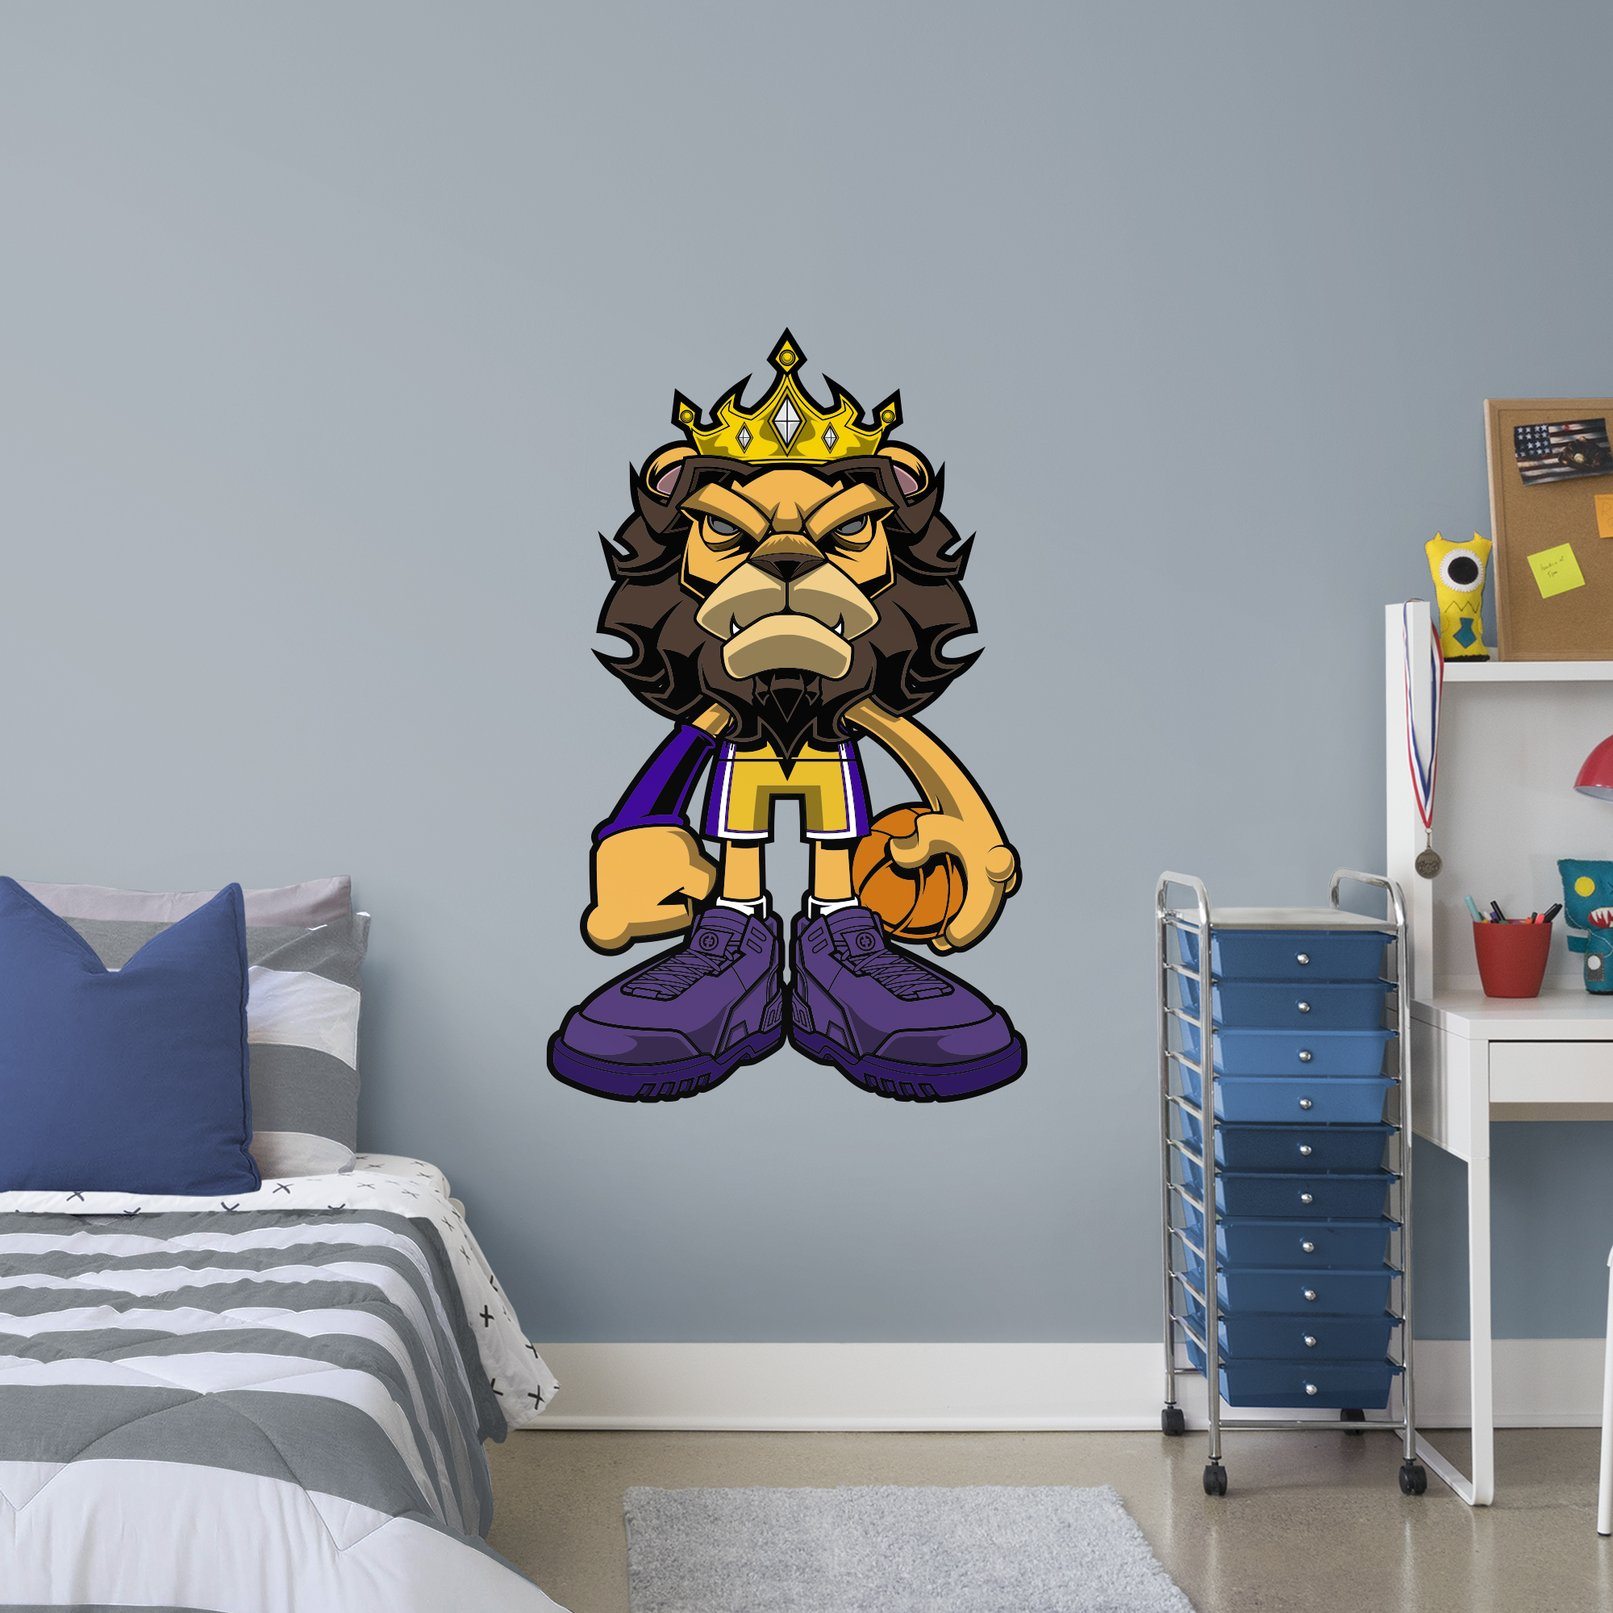 https://fathead.com/collections/tracy-tubera/products/mtt-103?variant=33197950337112